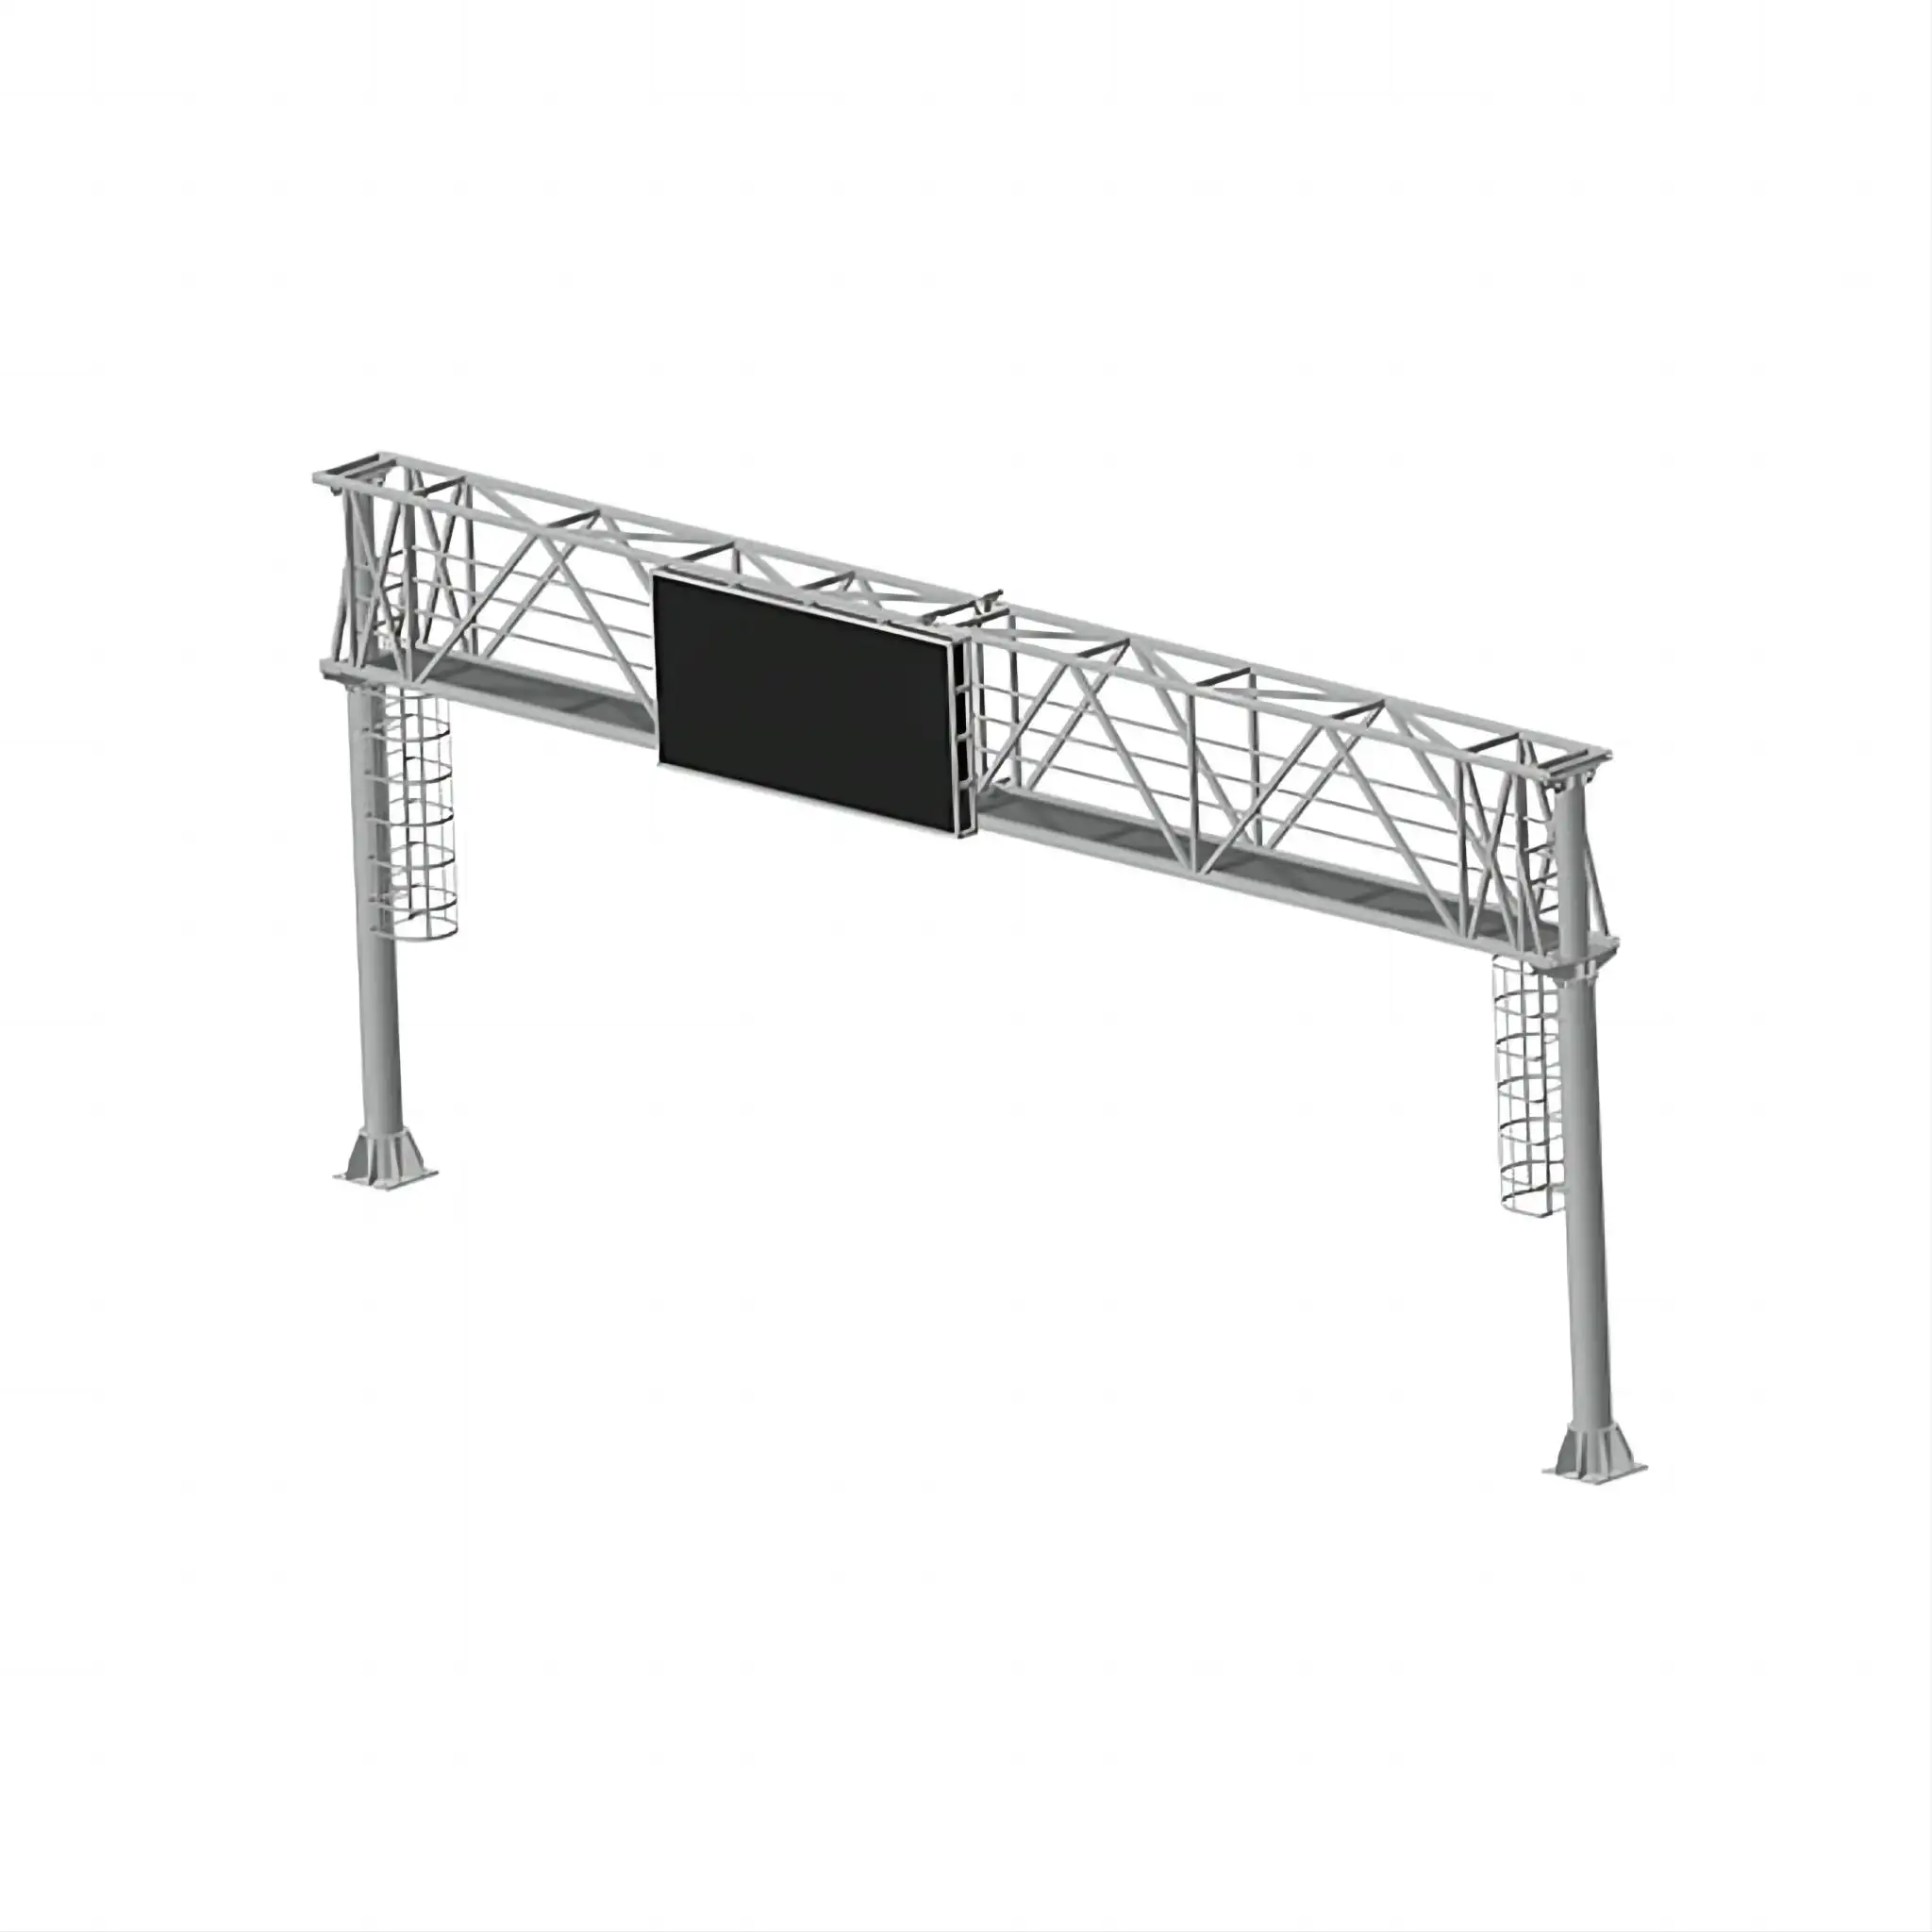 GASIM Outdoor Roadway Galvanized Steel Conical Pole Factory Highway Frame Reflective Traffic Gantry